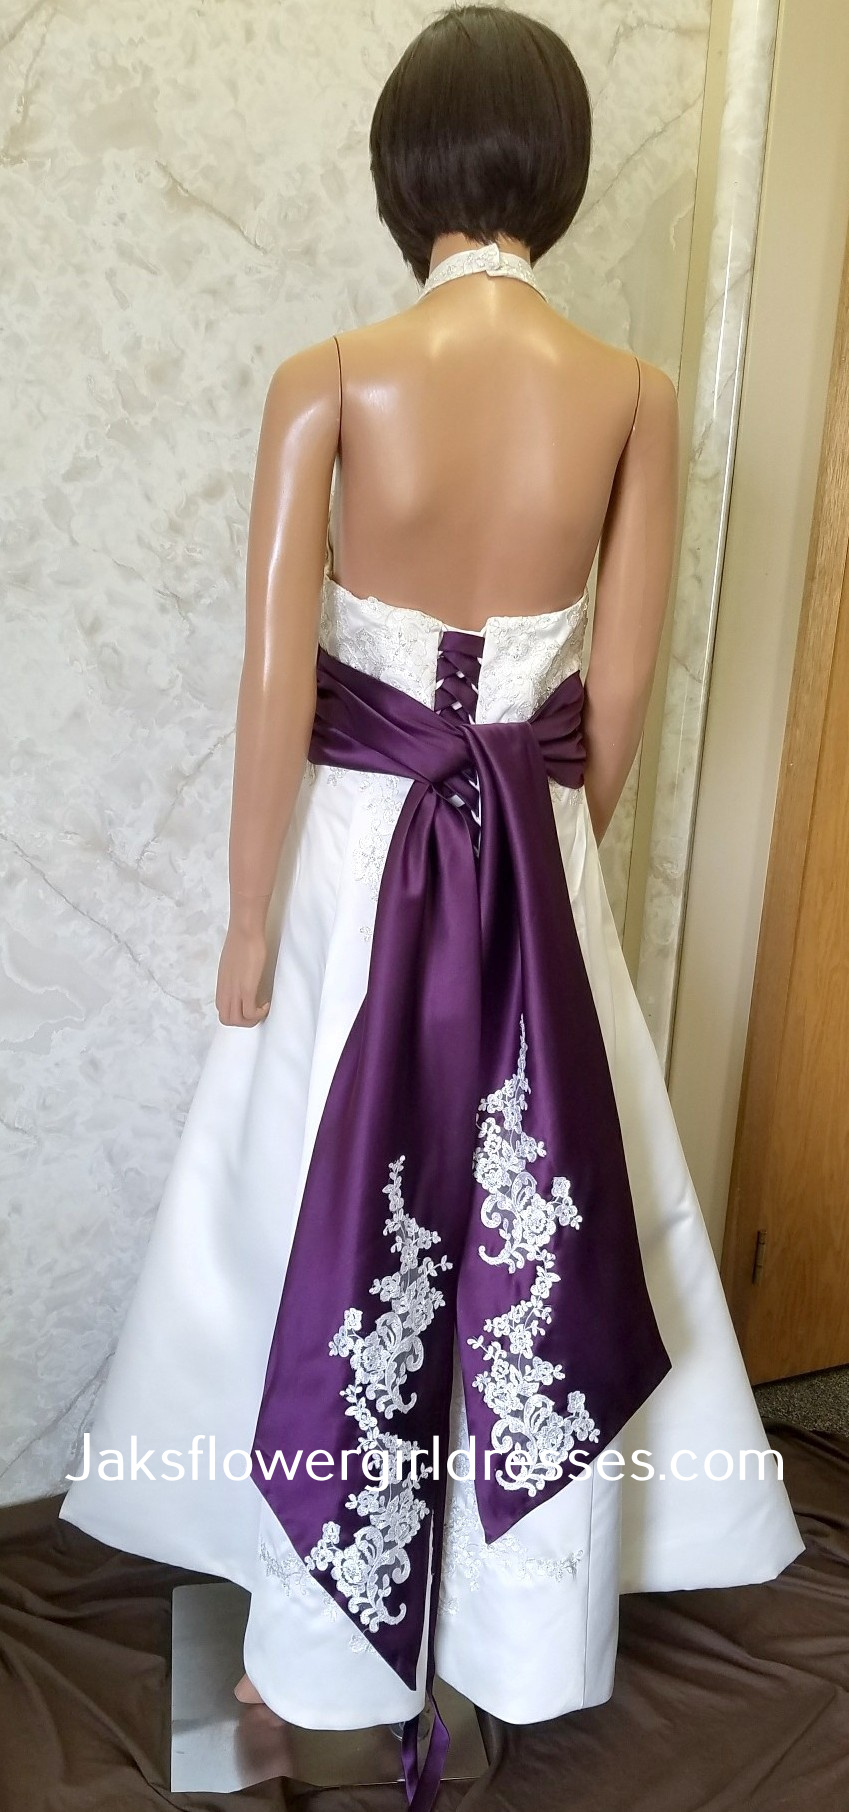 High low lace wedding dress with purple accents